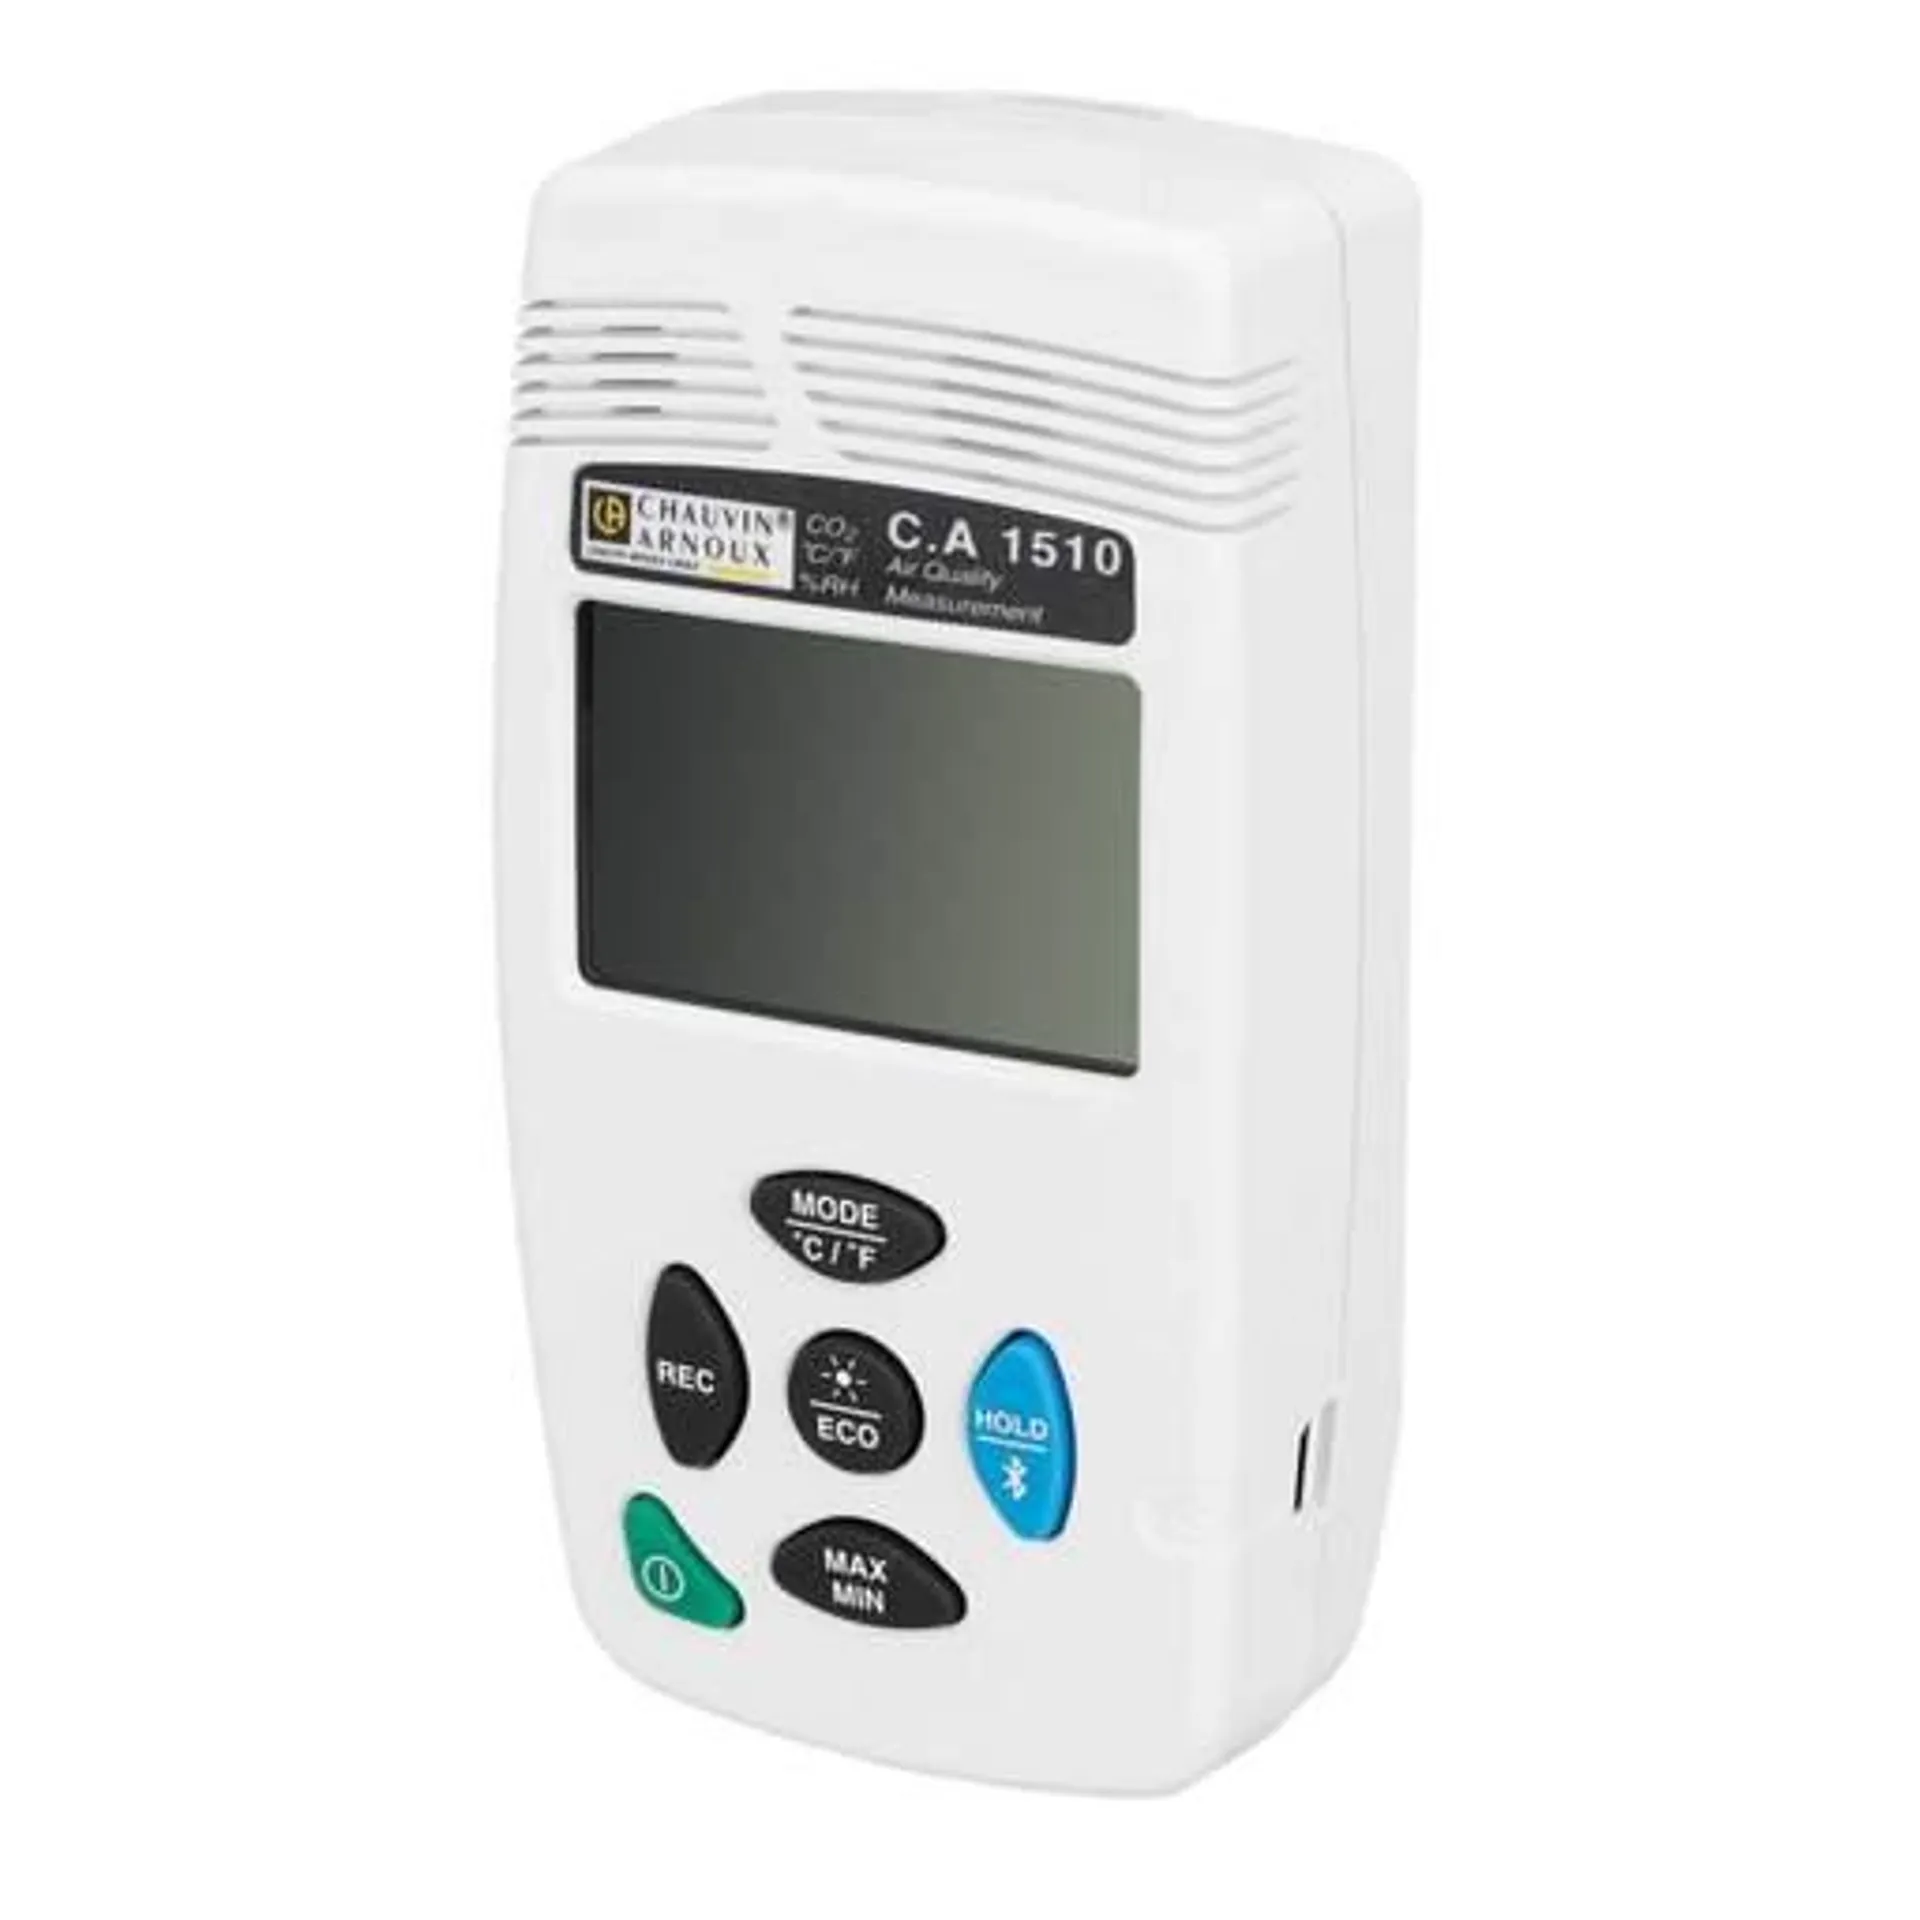 Chauvin-Arnoux CA1510 Multifunction Air Quality Data Logger